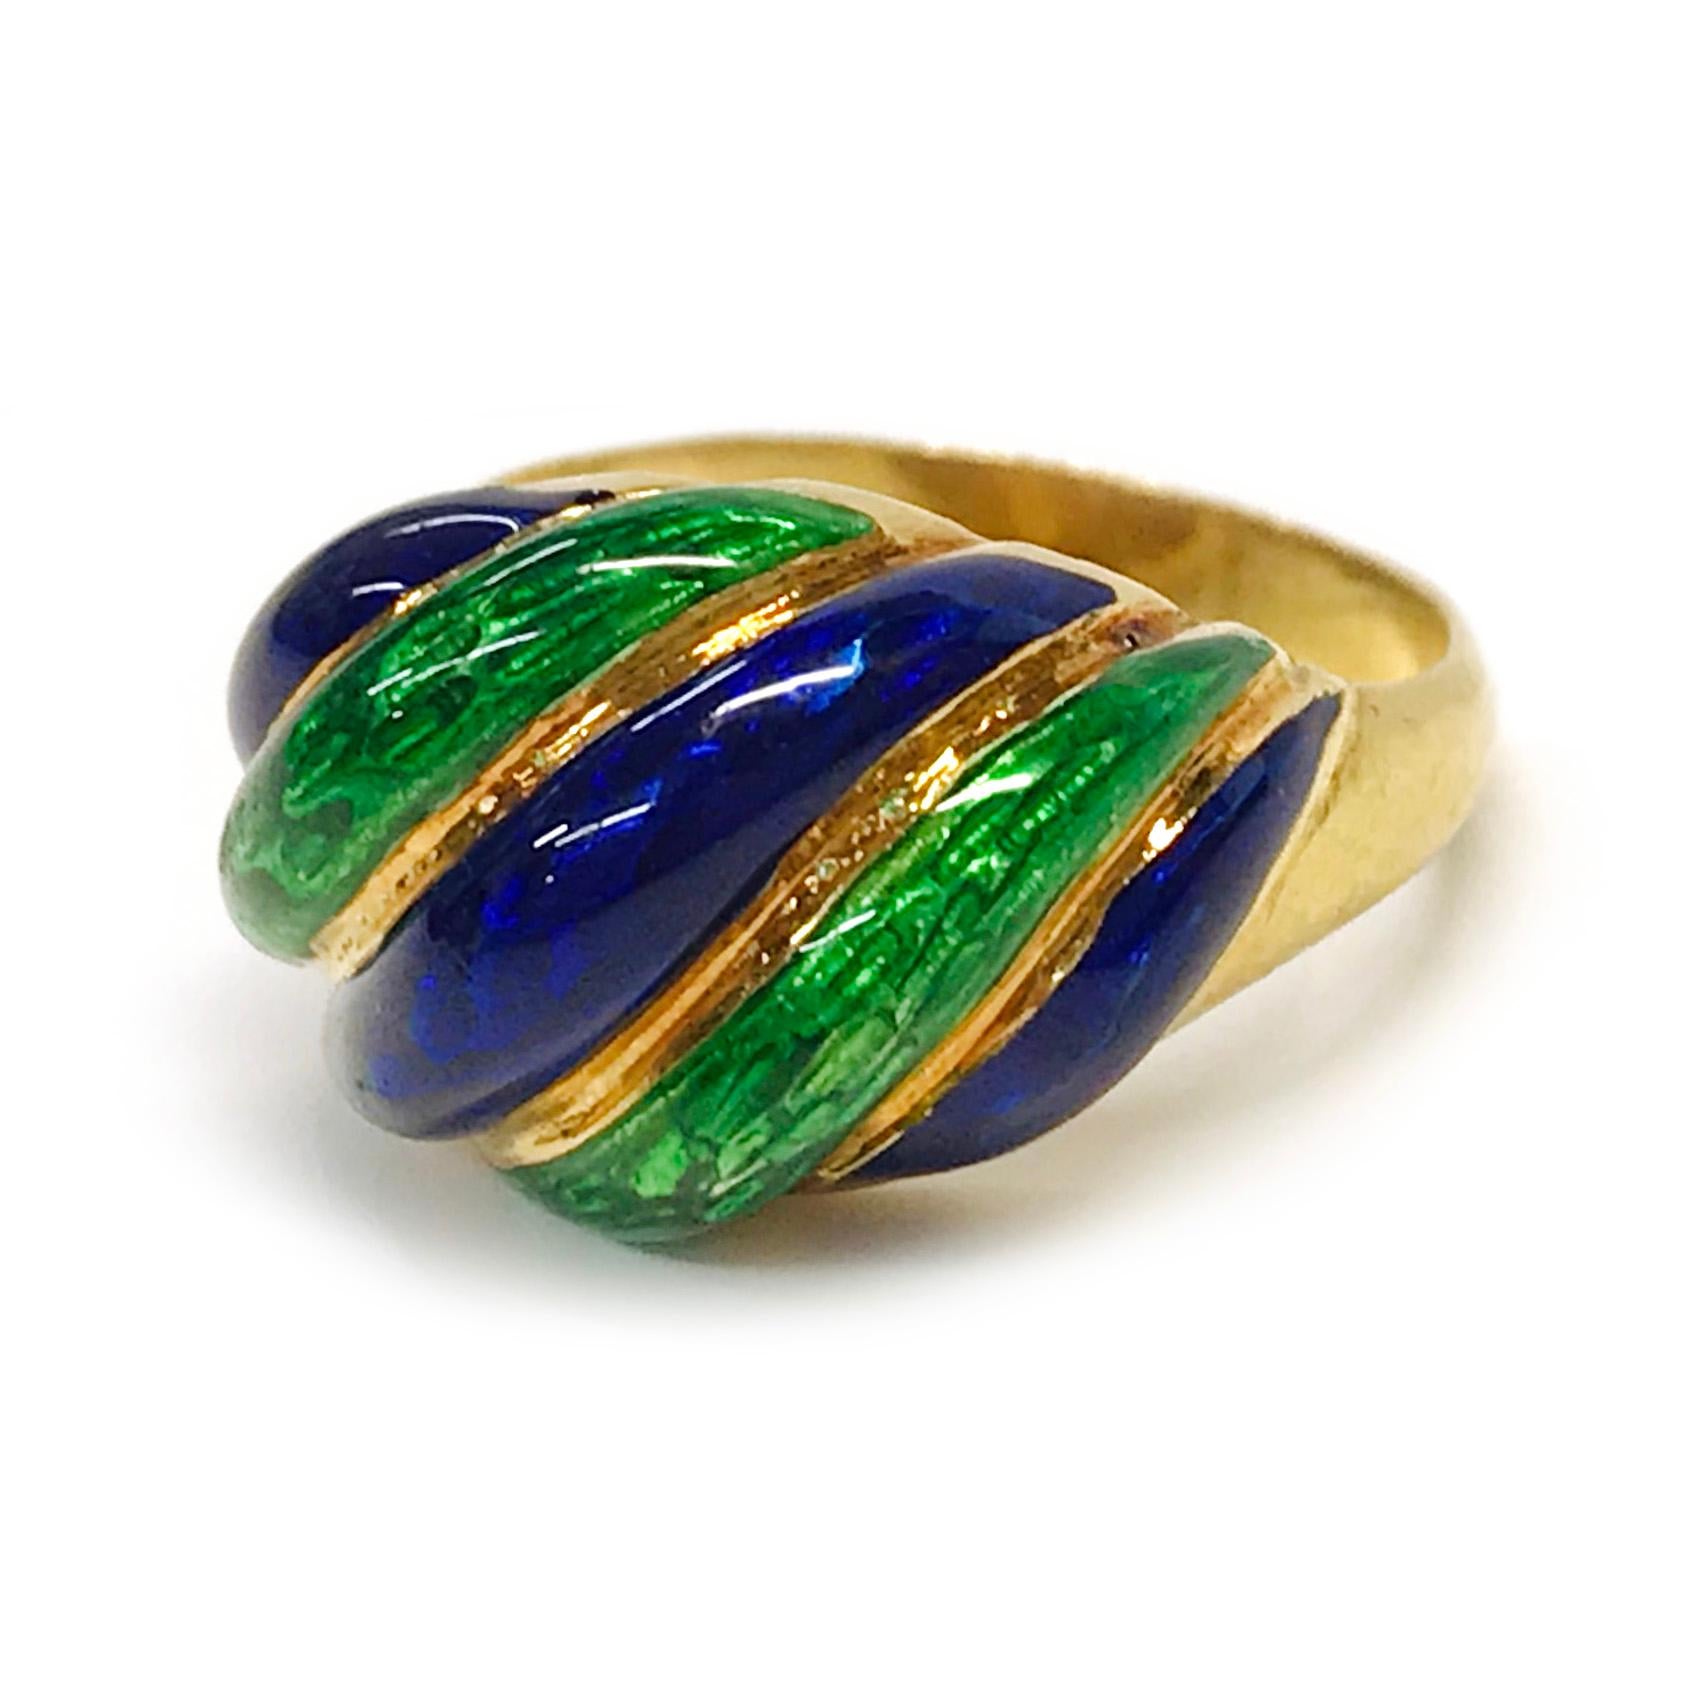 18 Karat Blue Green Enamel Ring. The ring features alternating blue and green enamel swirls on top of the ring and a tapered gold band. The ring is 23mm tall x 18.3mm wide x 11.4mm deep and the ring size is 5 1/4. The total gold weight of the ring